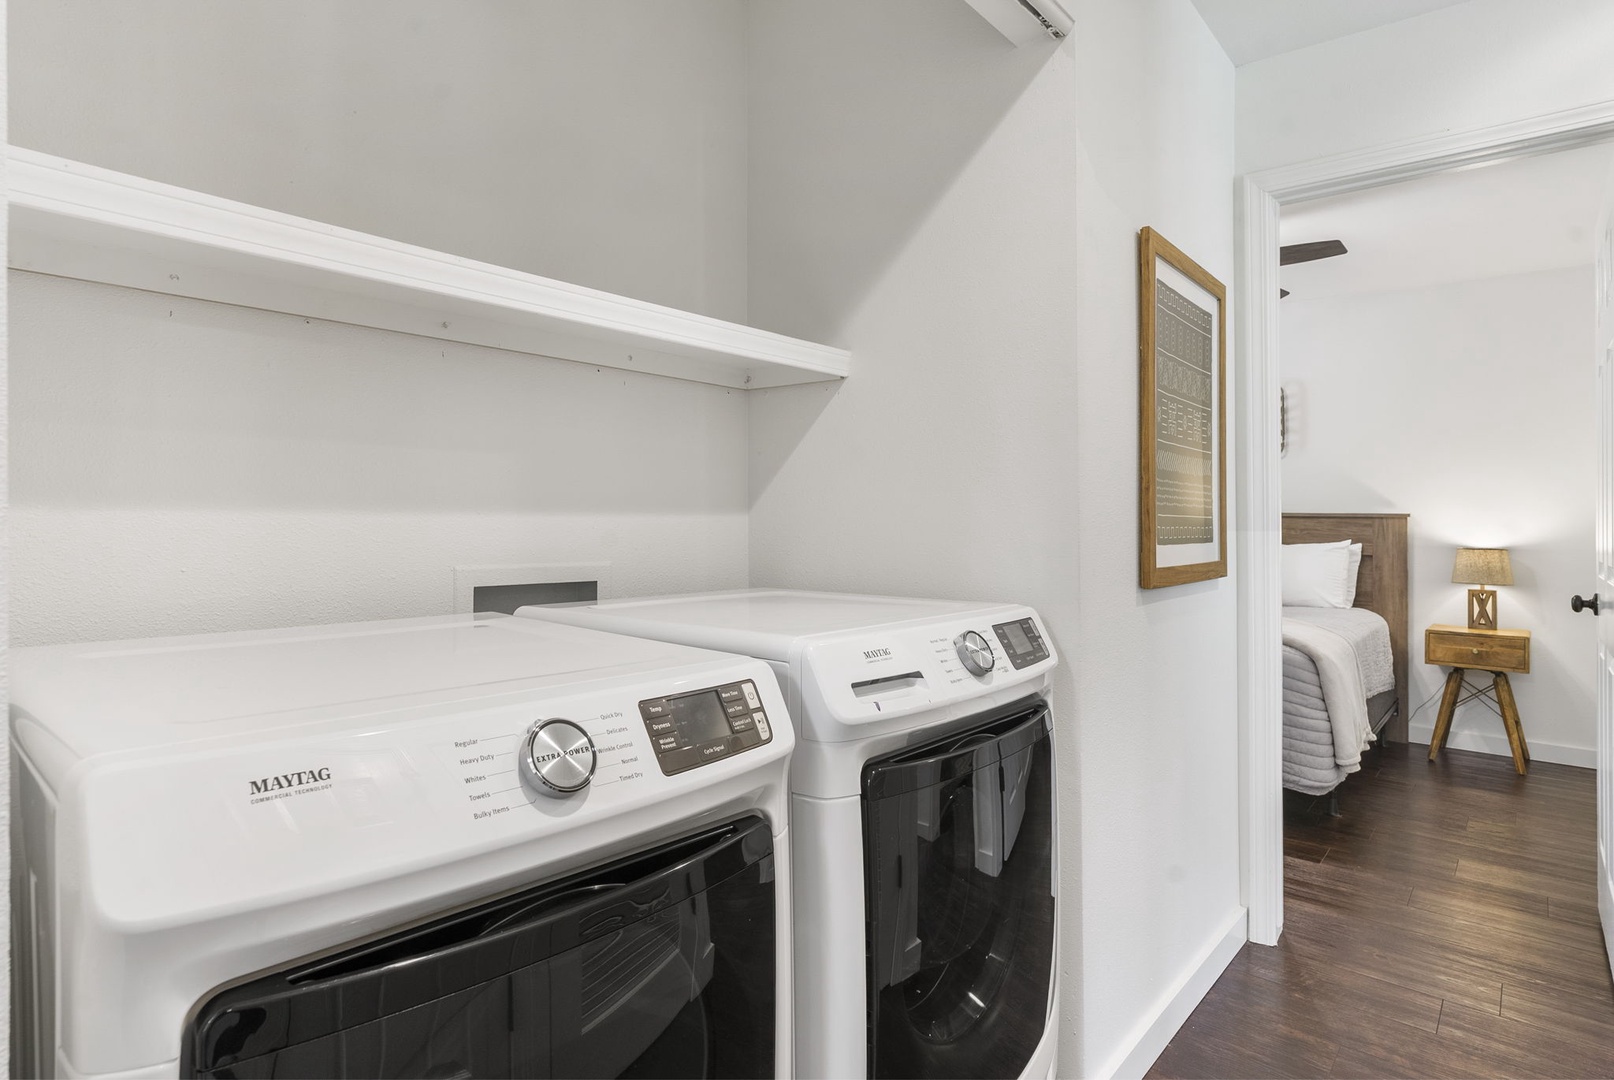 Private laundry is available for your stay, tucked away in the hall